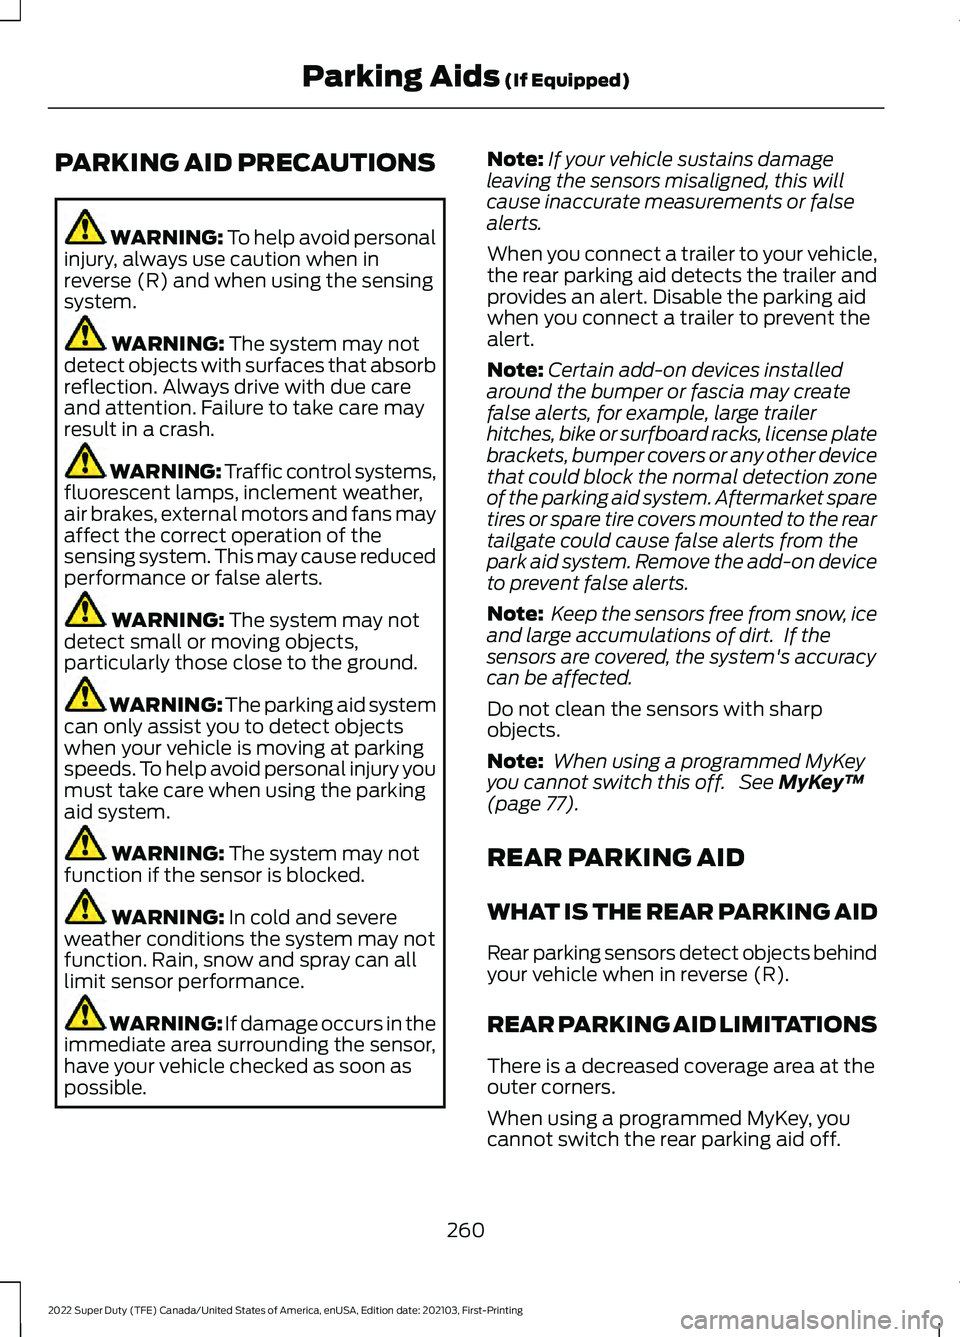 FORD F-350 2022  Owners Manual PARKING AID PRECAUTIONS
WARNING: To help avoid personal
injury, always use caution when in
reverse (R) and when using the sensing
system. WARNING: 
The system may not
detect objects with surfaces that